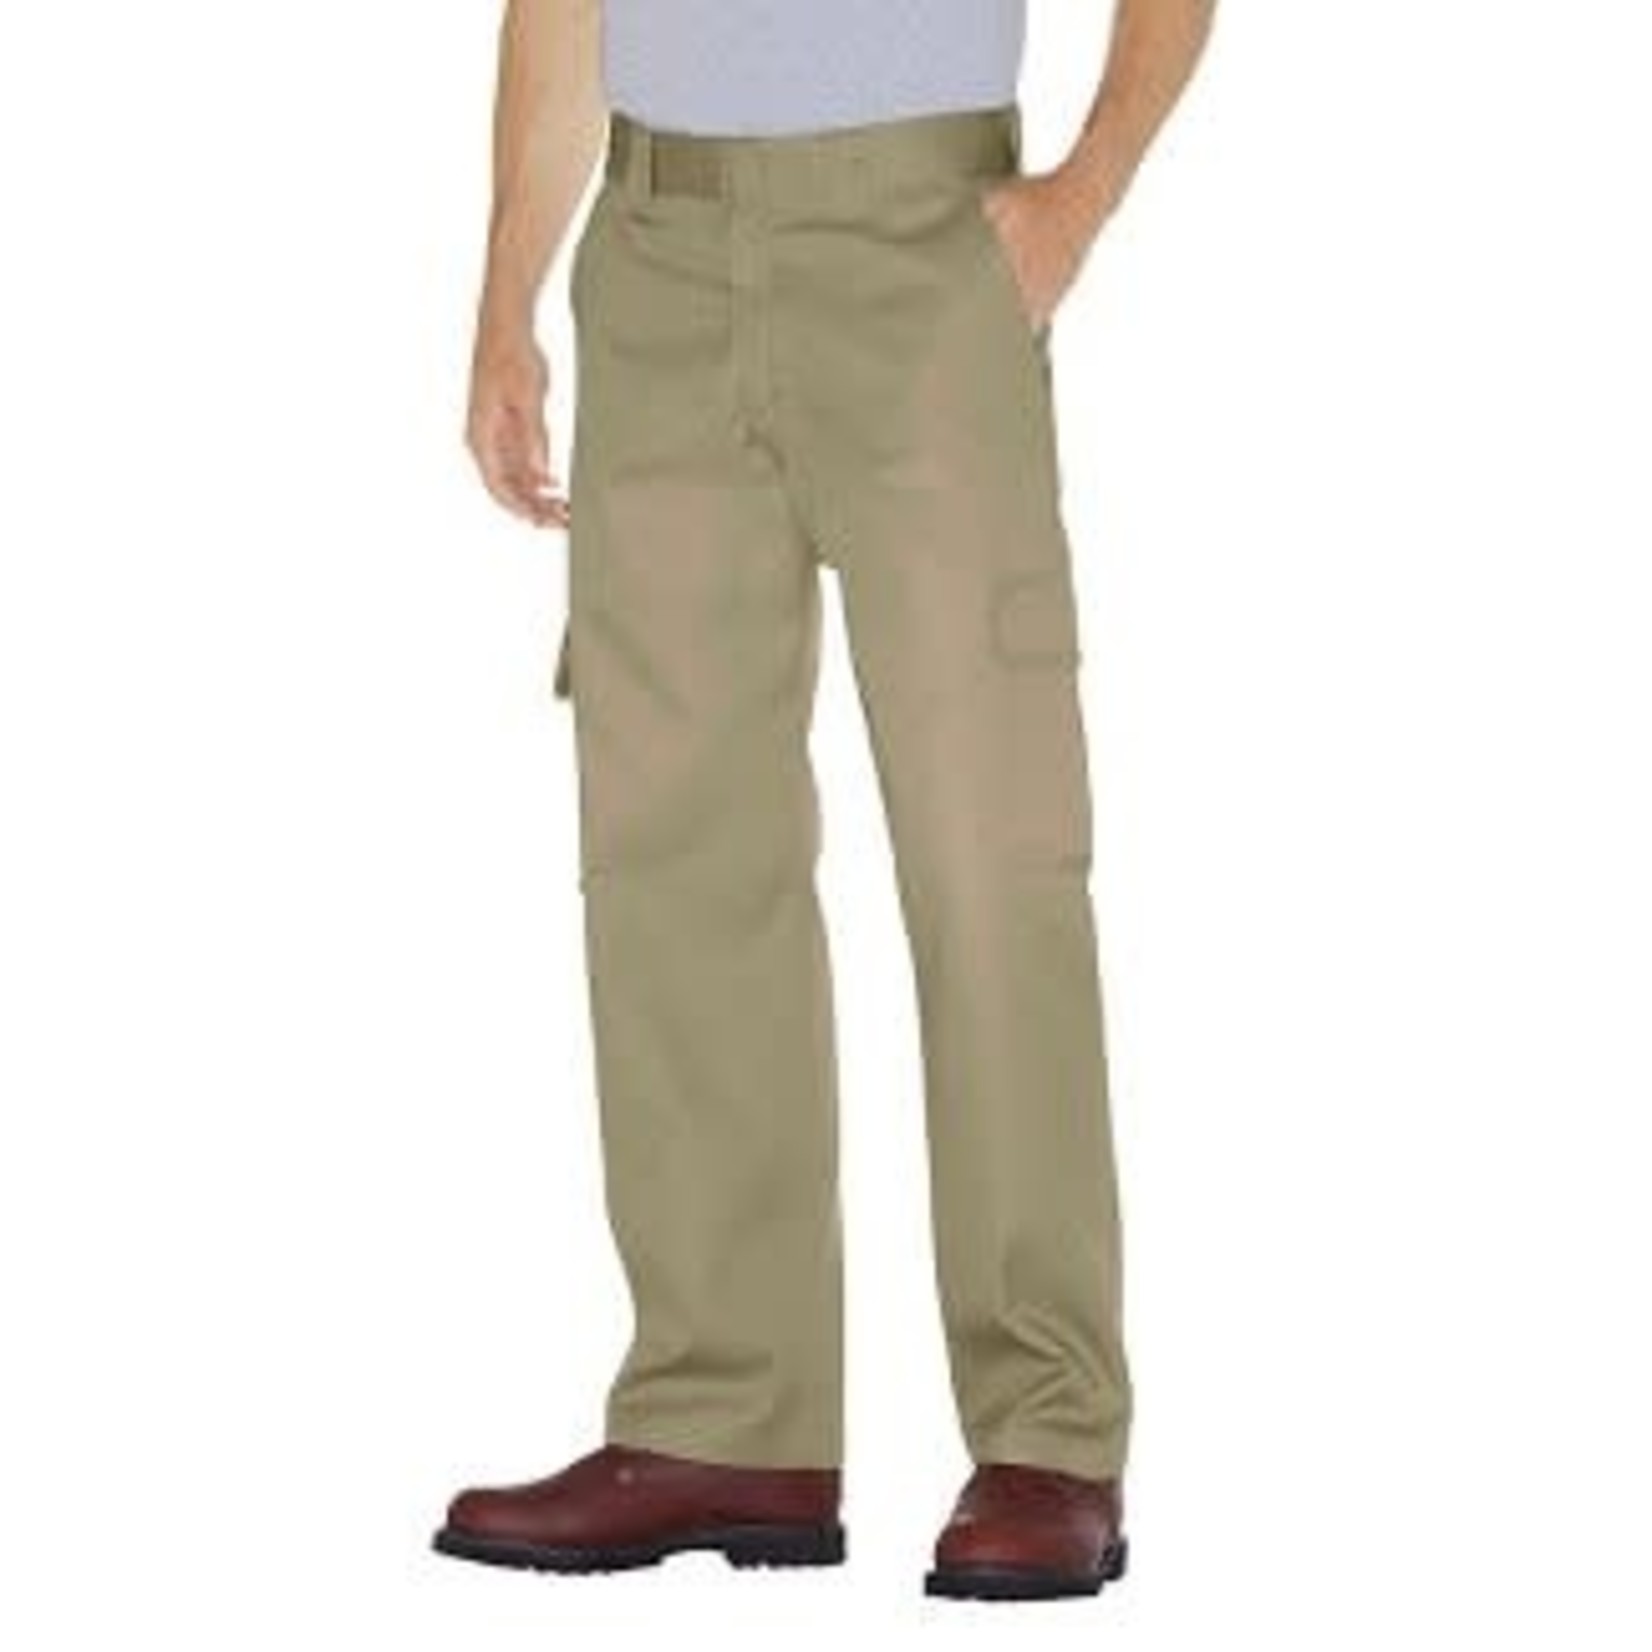 Dickies Men's Relaxed Fit Straight Leg Cargo Work Pants 42x30